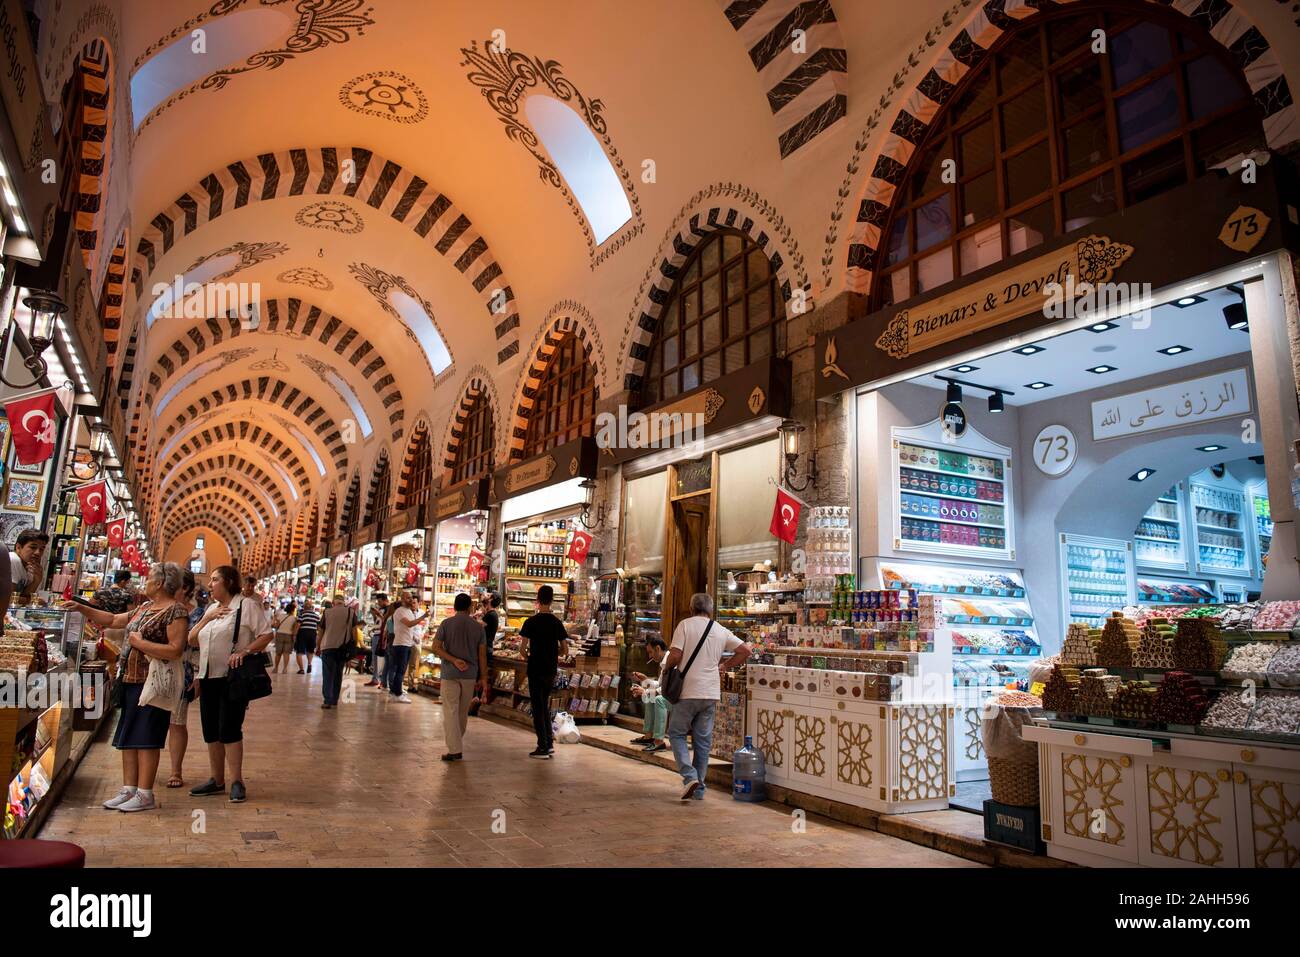 The Istanbul Grand Bazaar, considered to be the oldest market in history with jewelry,carpet, leather, gift, spice and souvenir shops. Stock Photo